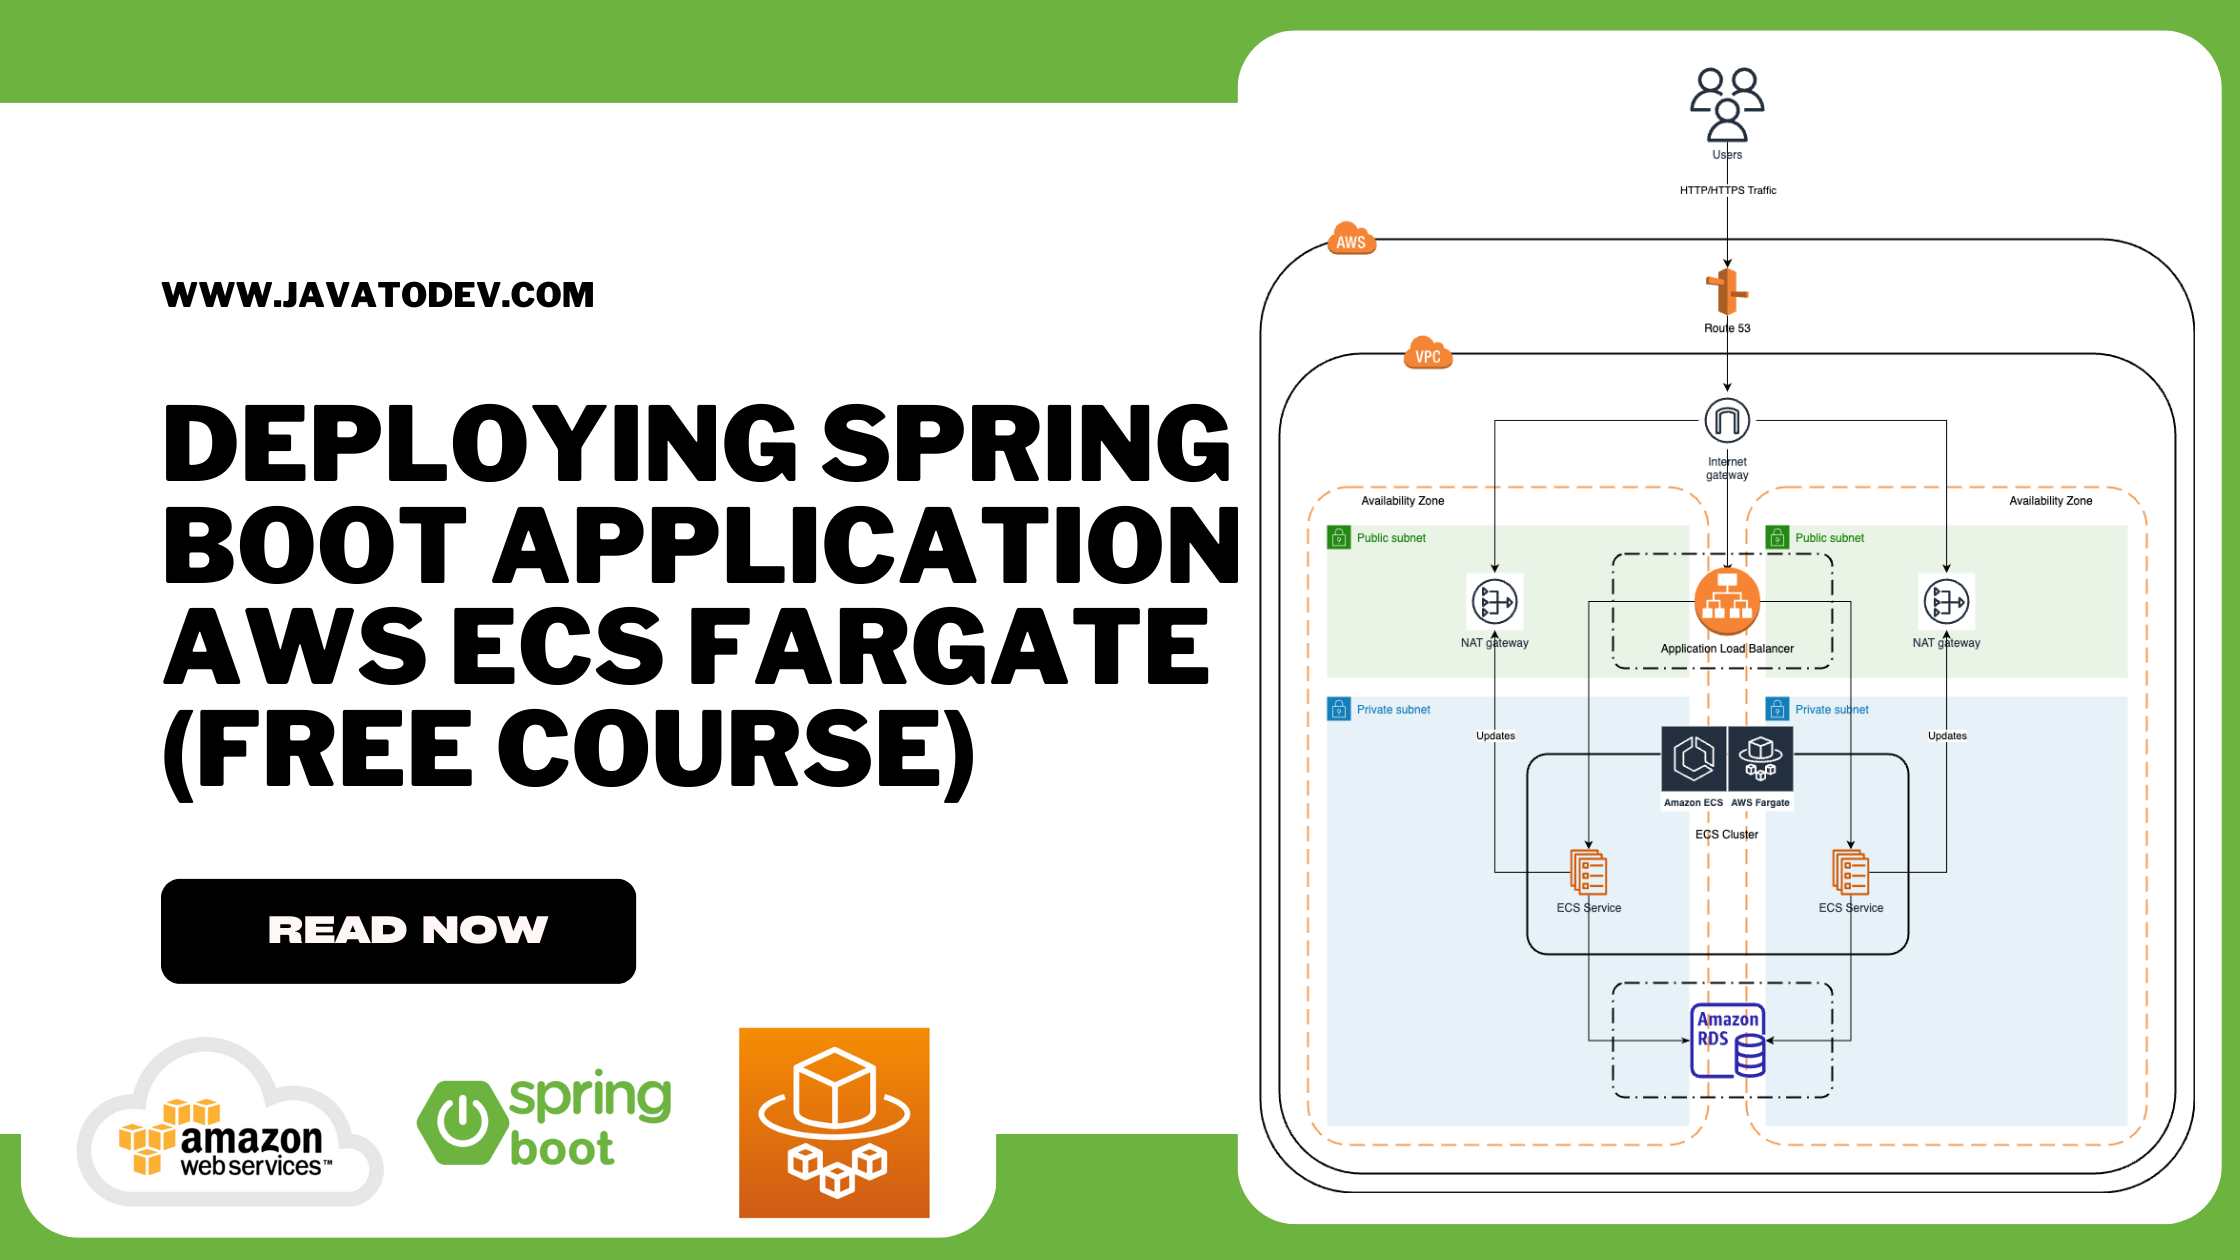 Deploying Spring Boot Applications With AWS ECS Fargate (Free Course)